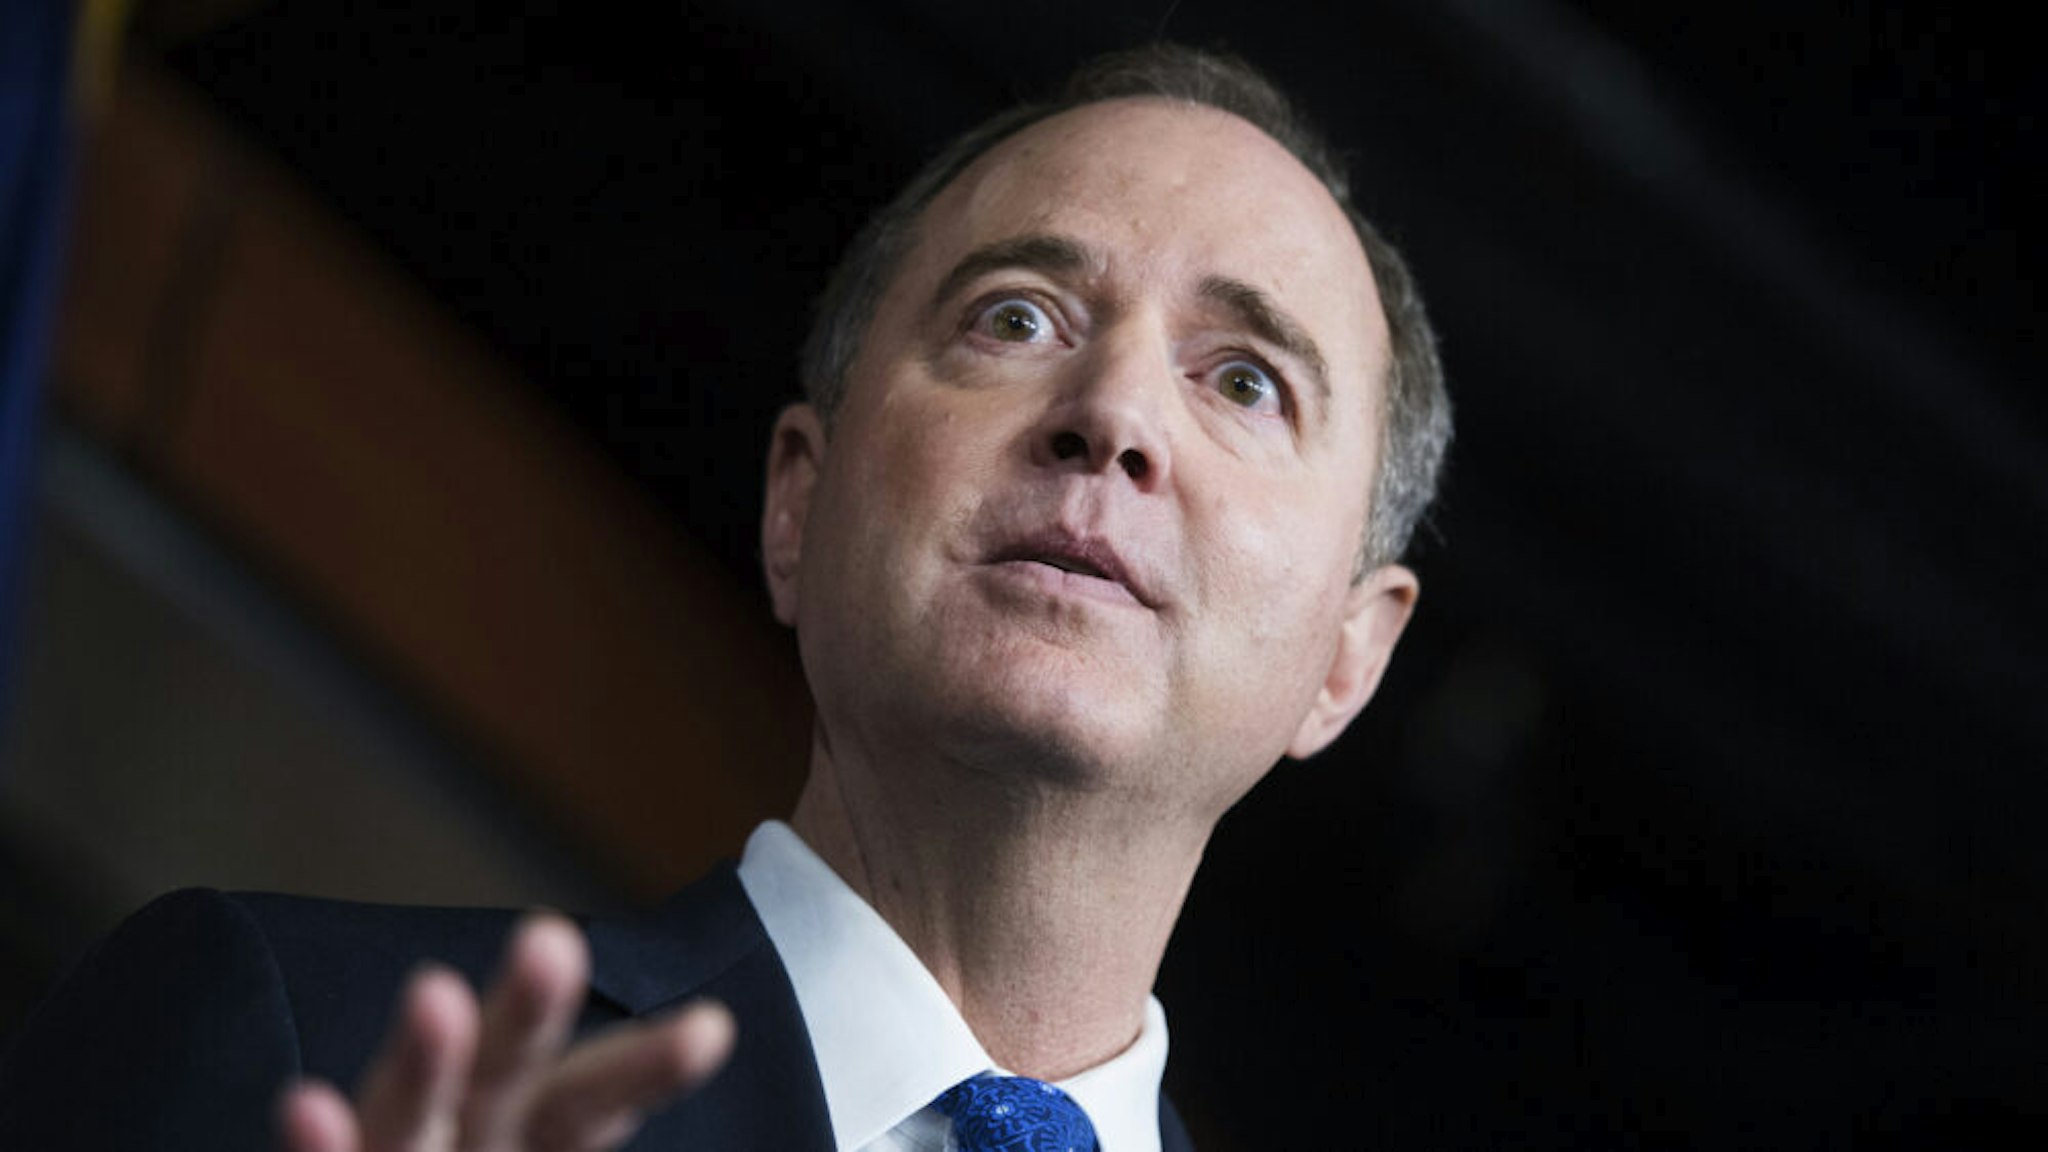 House Intelligence Committee Chairman Adam Schiff, D-Calif., conducts a news conference in the Capitol Visitor Center on the transcript of a phone call between President Trump and Ukrainian President Volodymyr Zelensky on Wednesday, September 25, 2019.